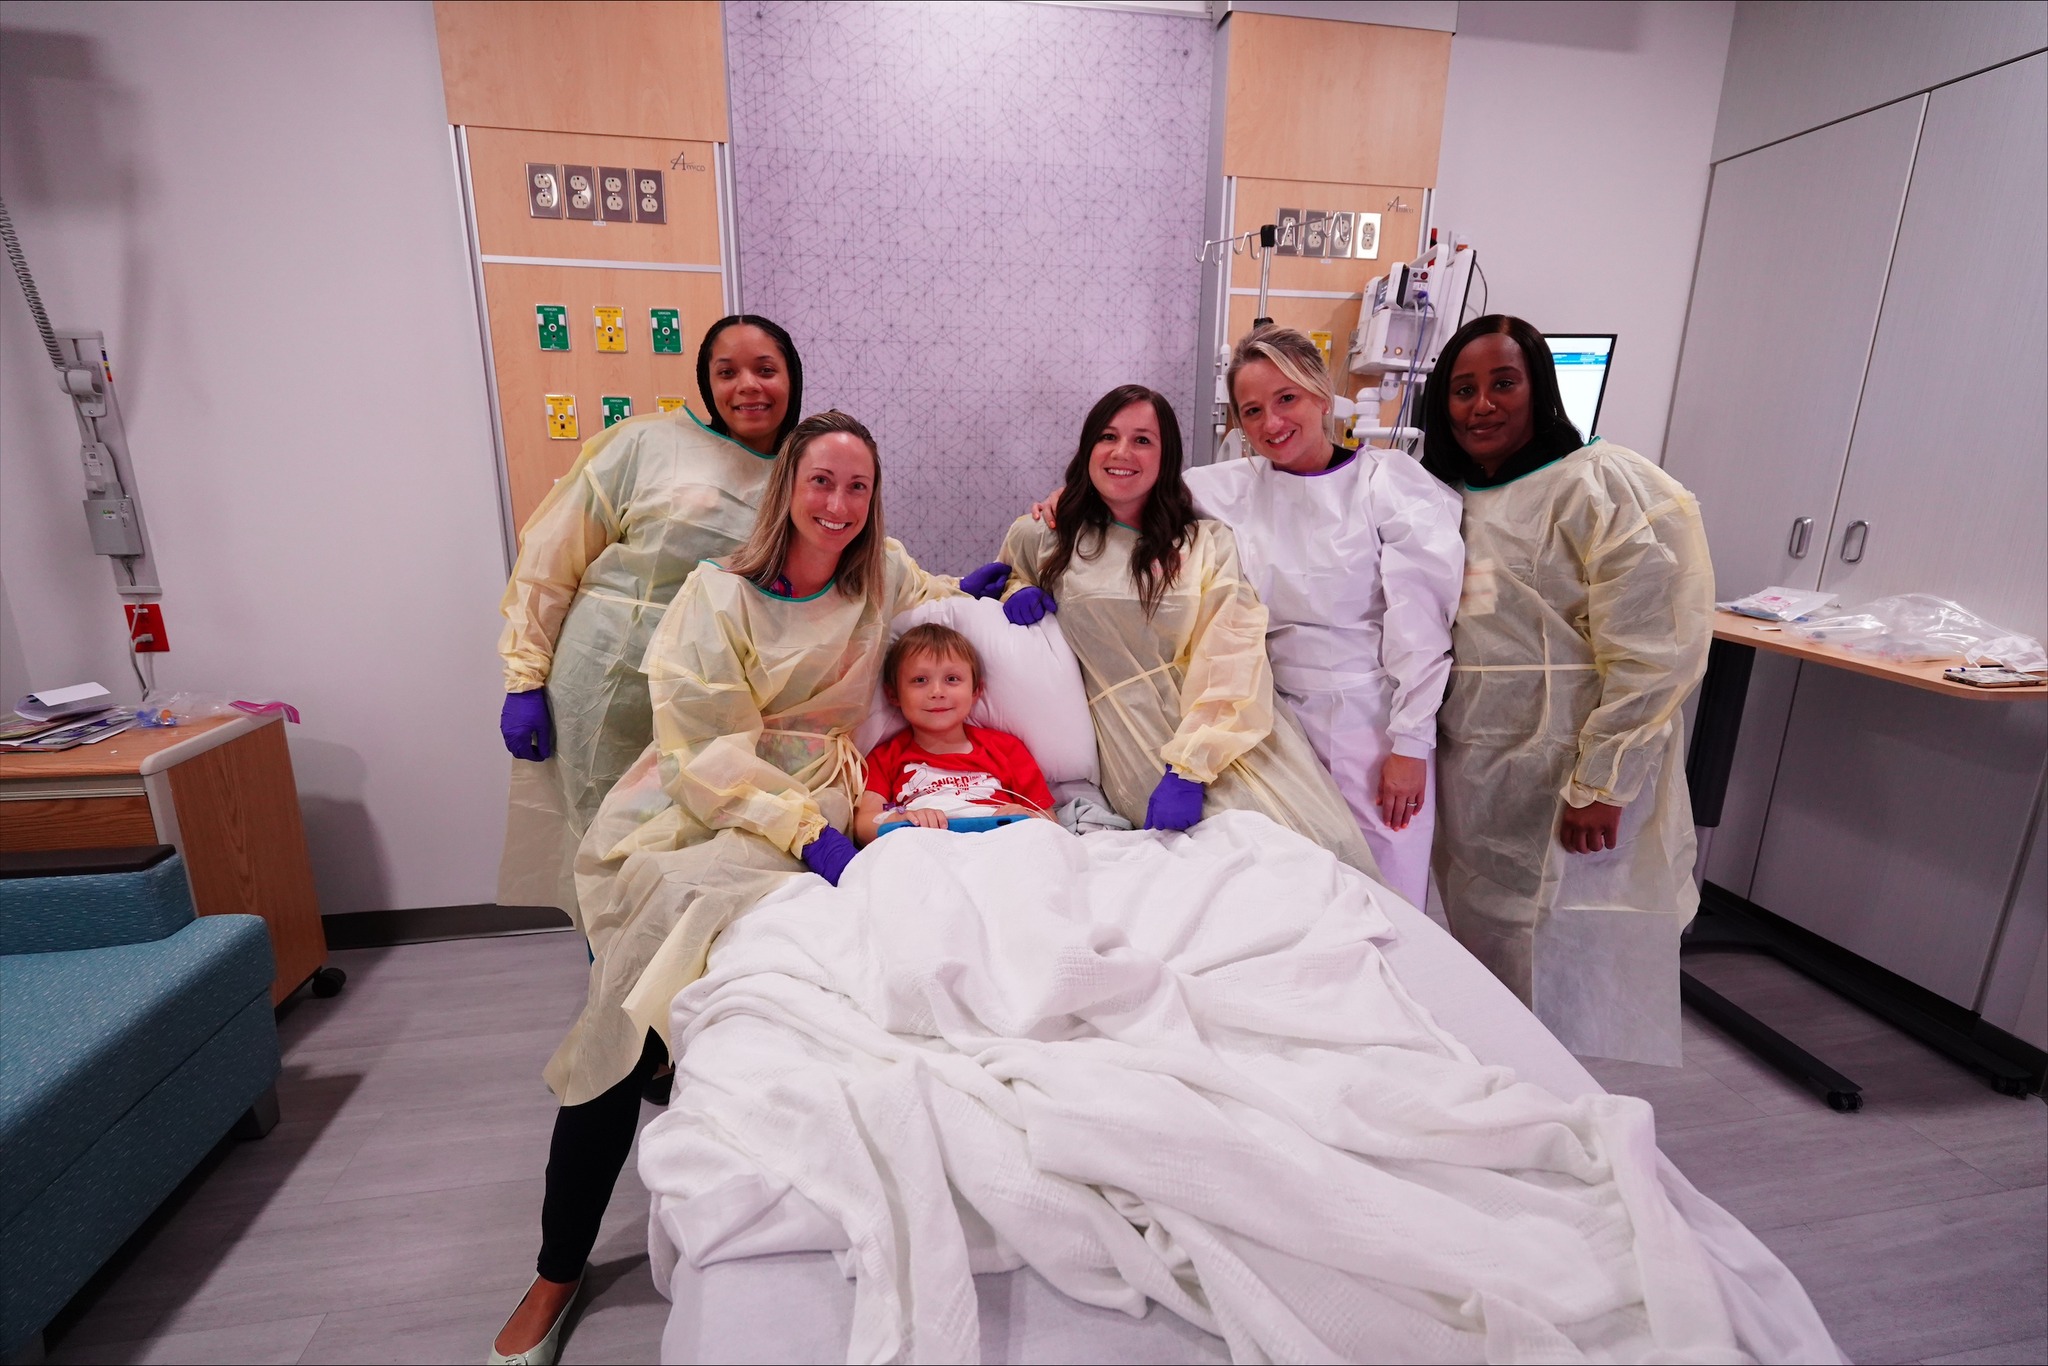 Five-year-old Karson gets prepped for an injection that doctors hope will help slow the progression of his muscular dystrophy. (Photo: Children's Hospital of The King's Daughters )